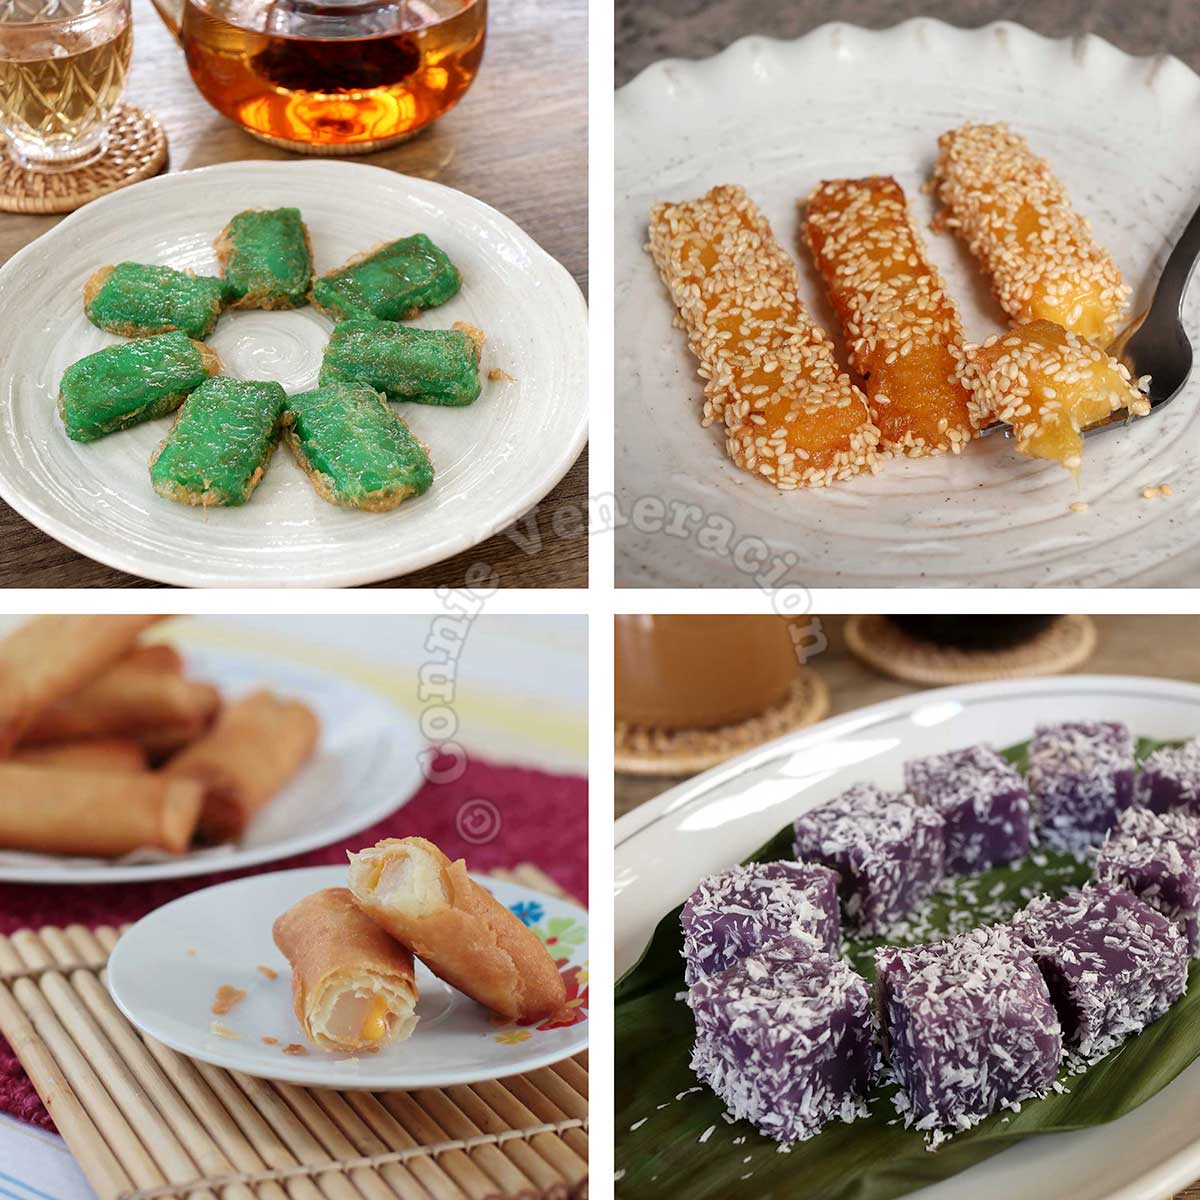 Four ways to serve nian gao: dipped in egg and fried, coated with sesame seeds and fried, as spring roll filling, and steamed with desiccated coconut